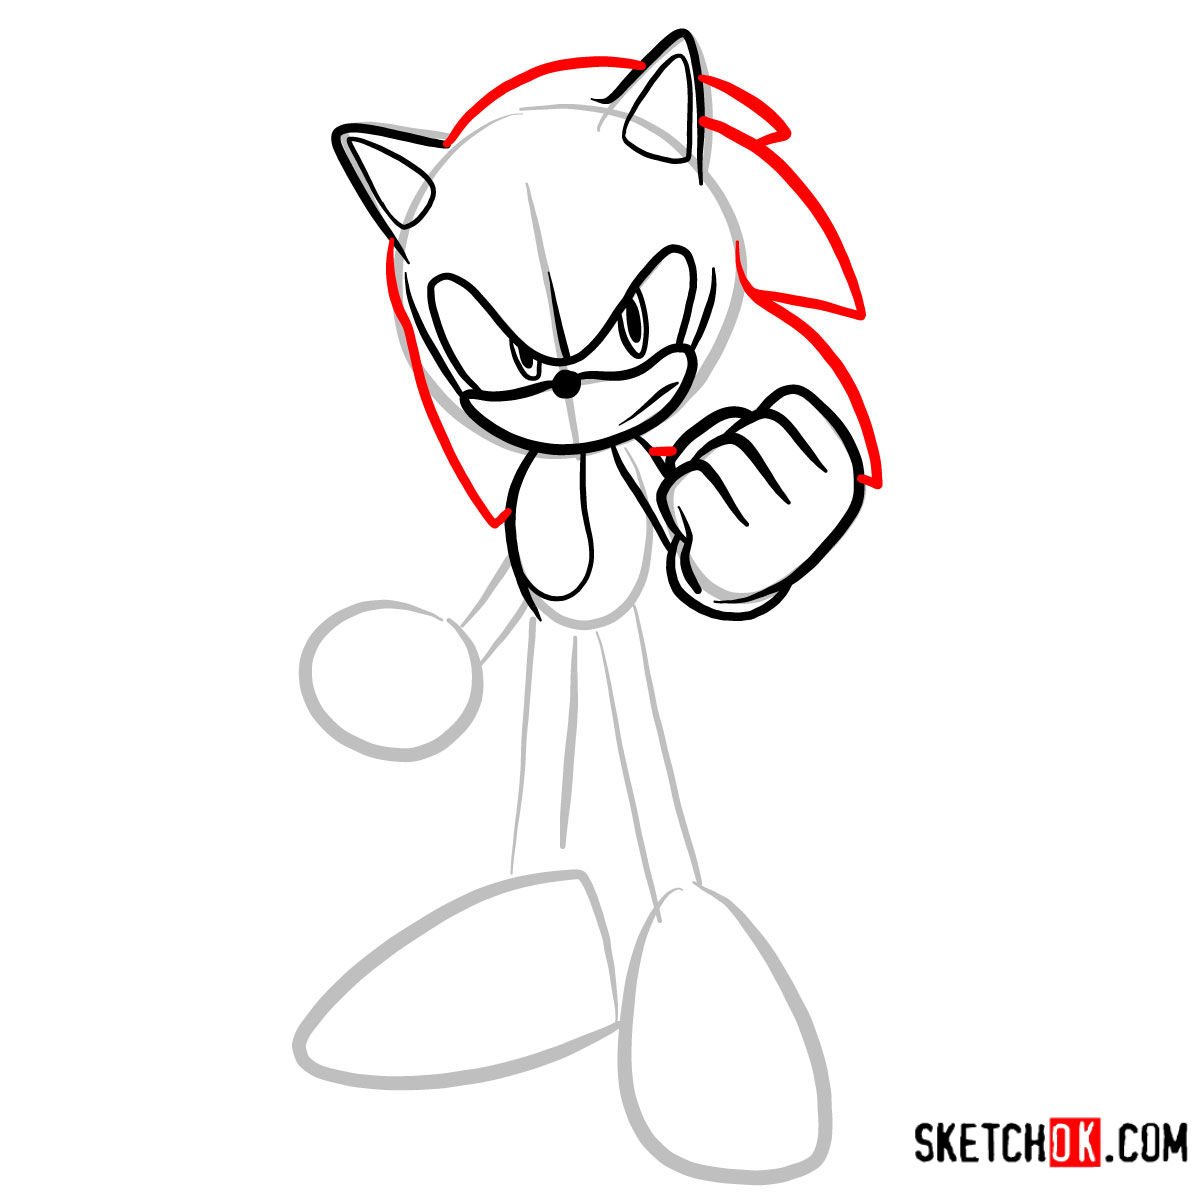 How to draw Sonic the Hedgehog - step 06